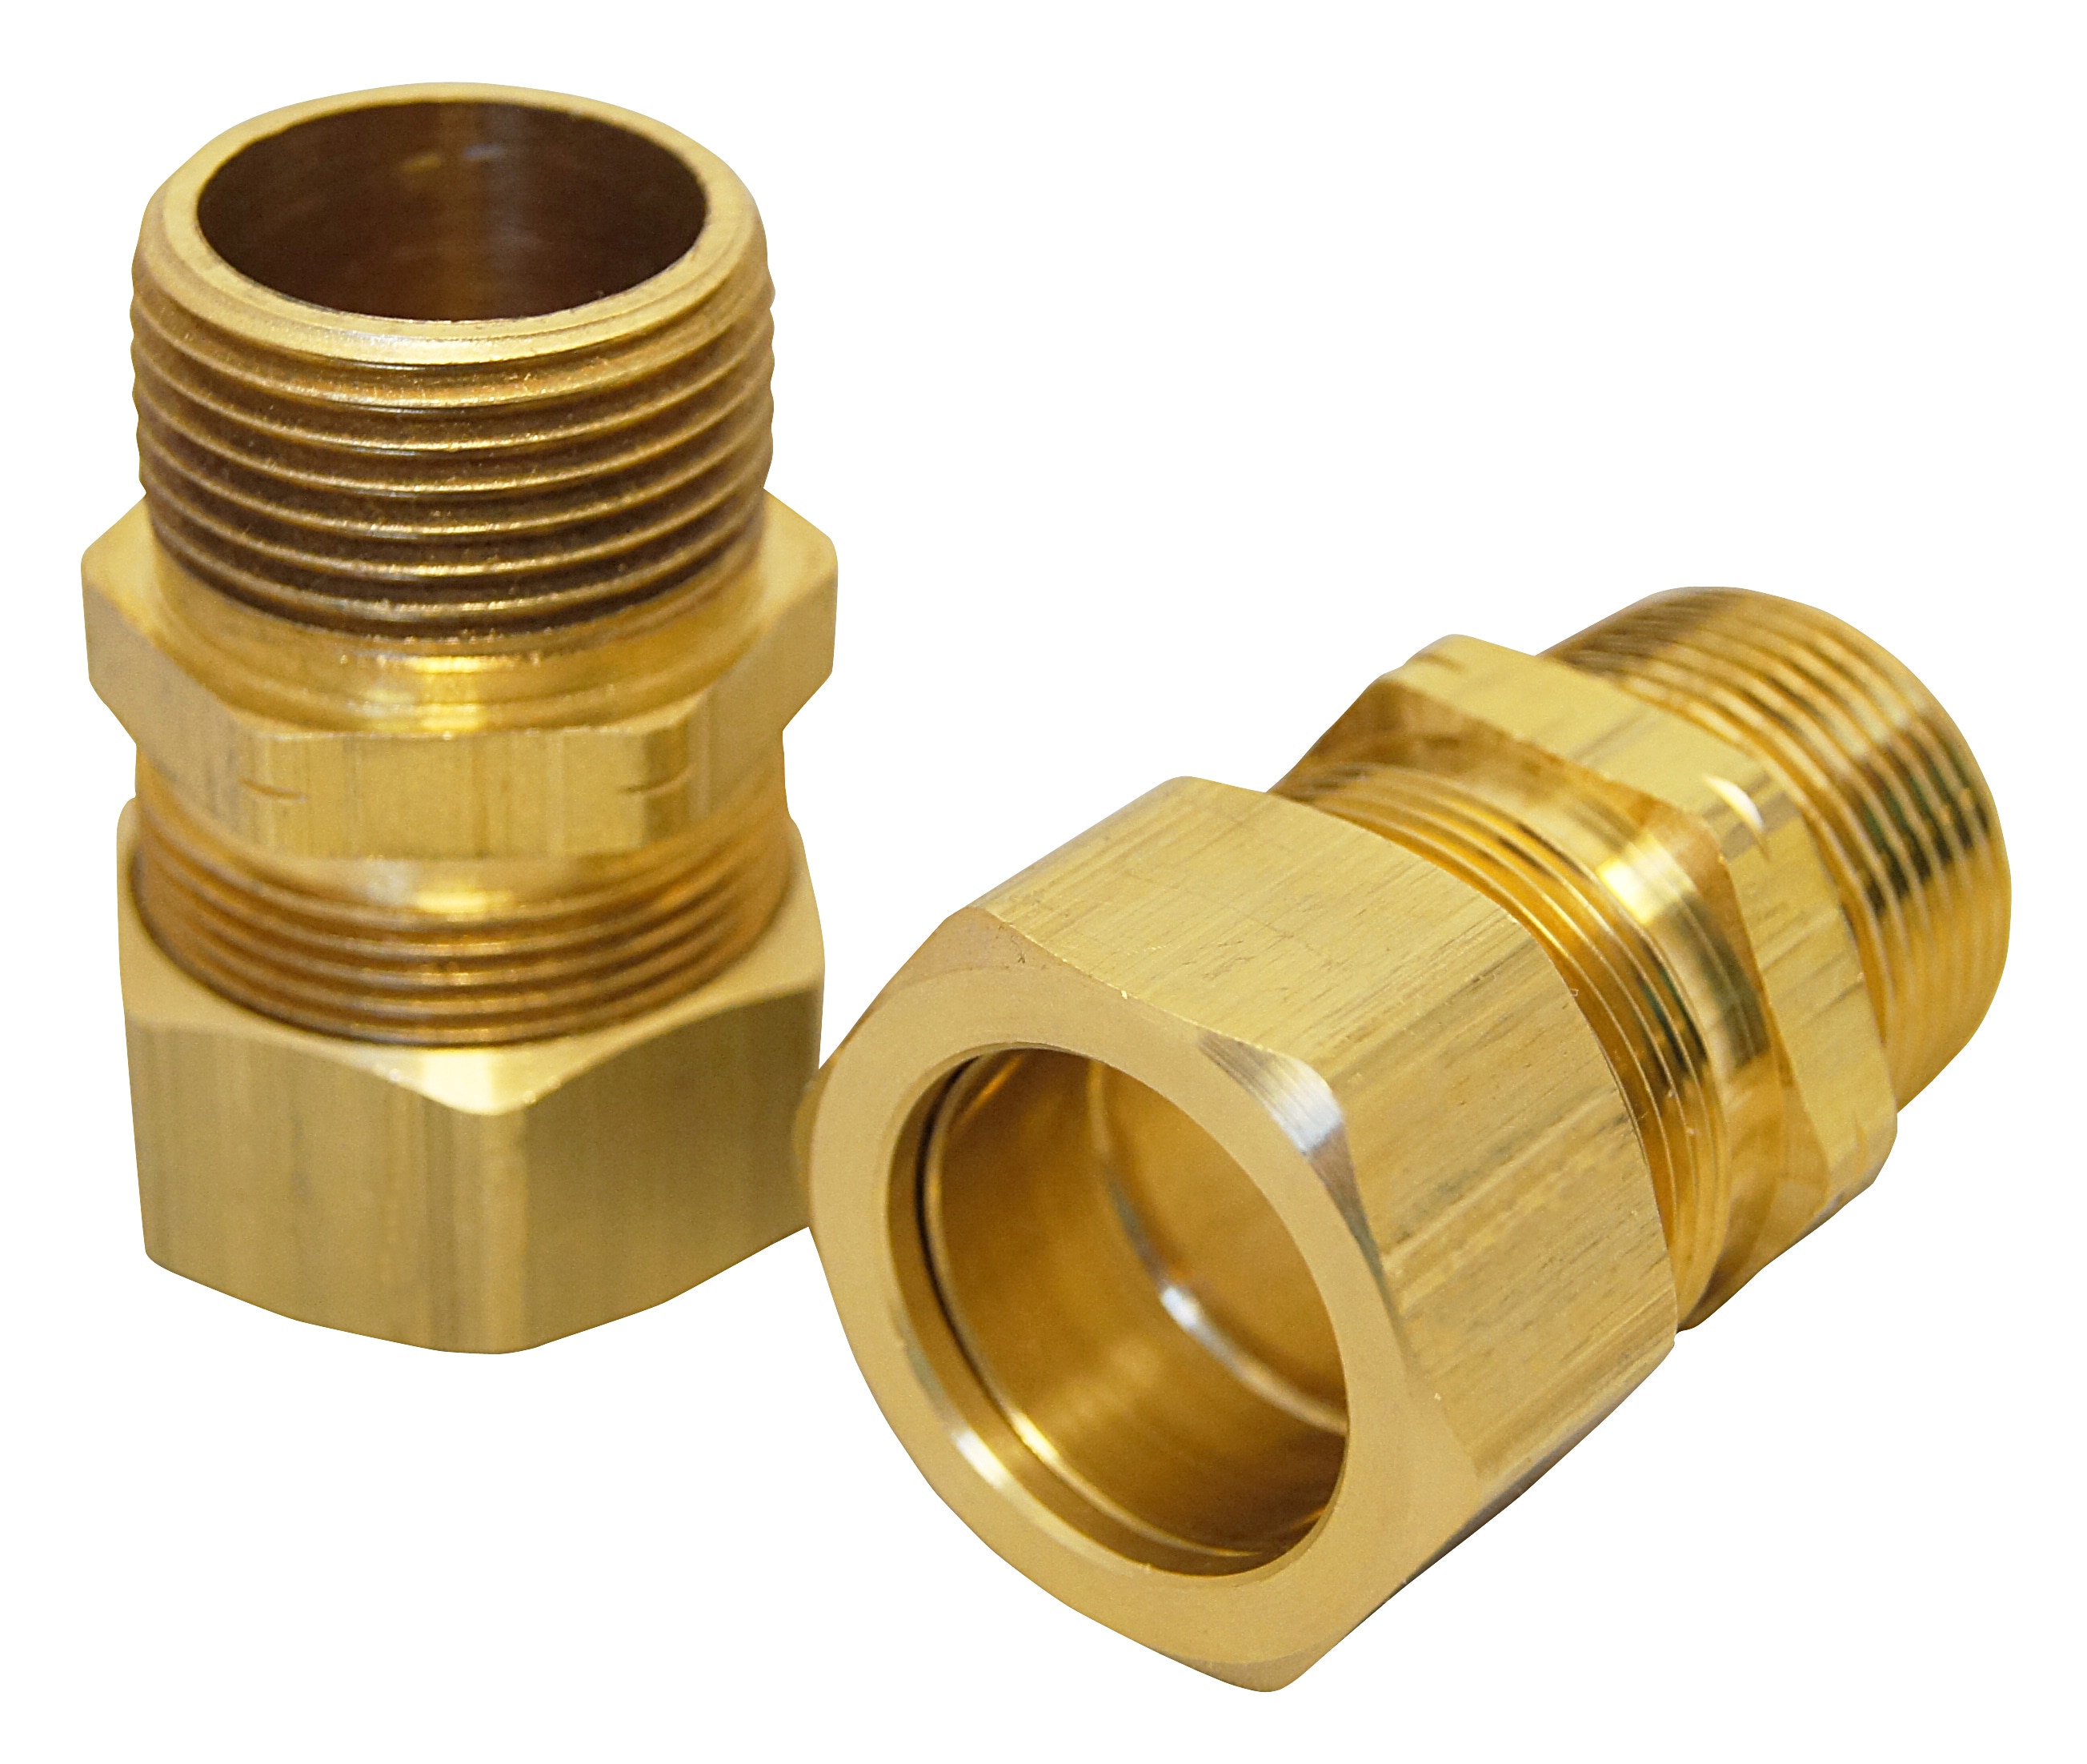 Apollo 3/4-in x 3/4-in Compression Adapter Fitting in the Brass